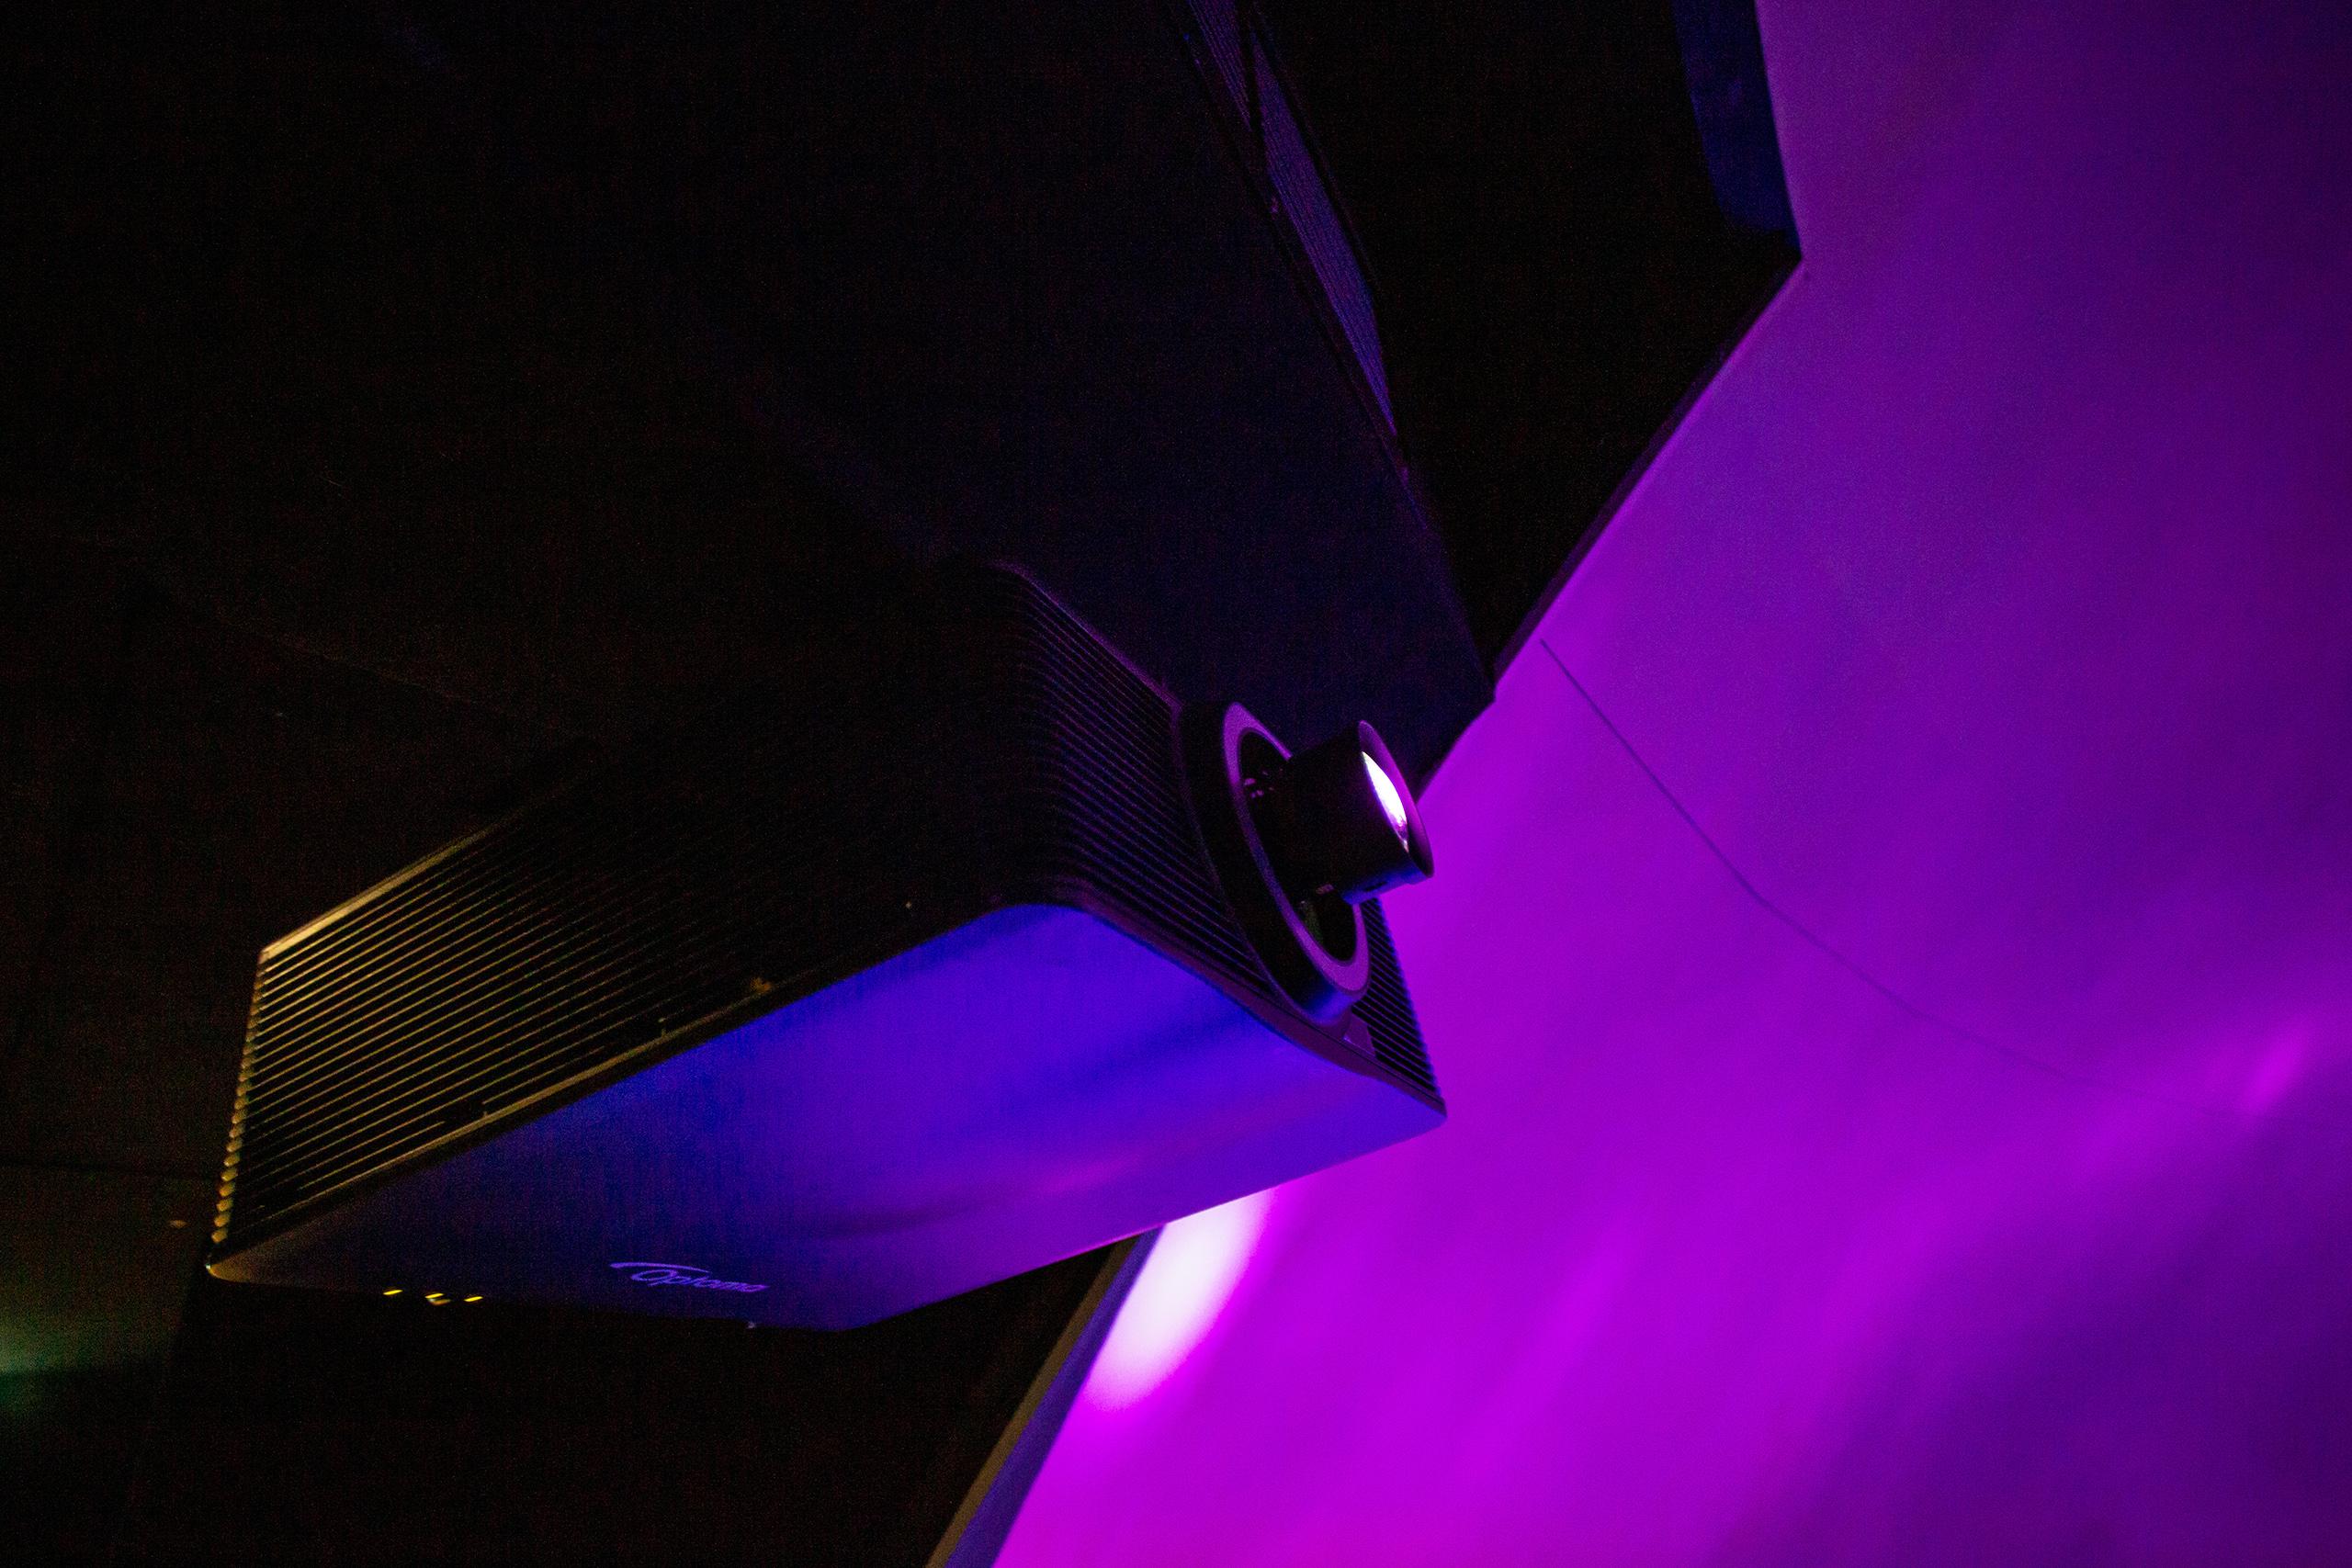 An Optoma projector is installed at the Space Dome of Jodrell Bank's First Light Pavilion.